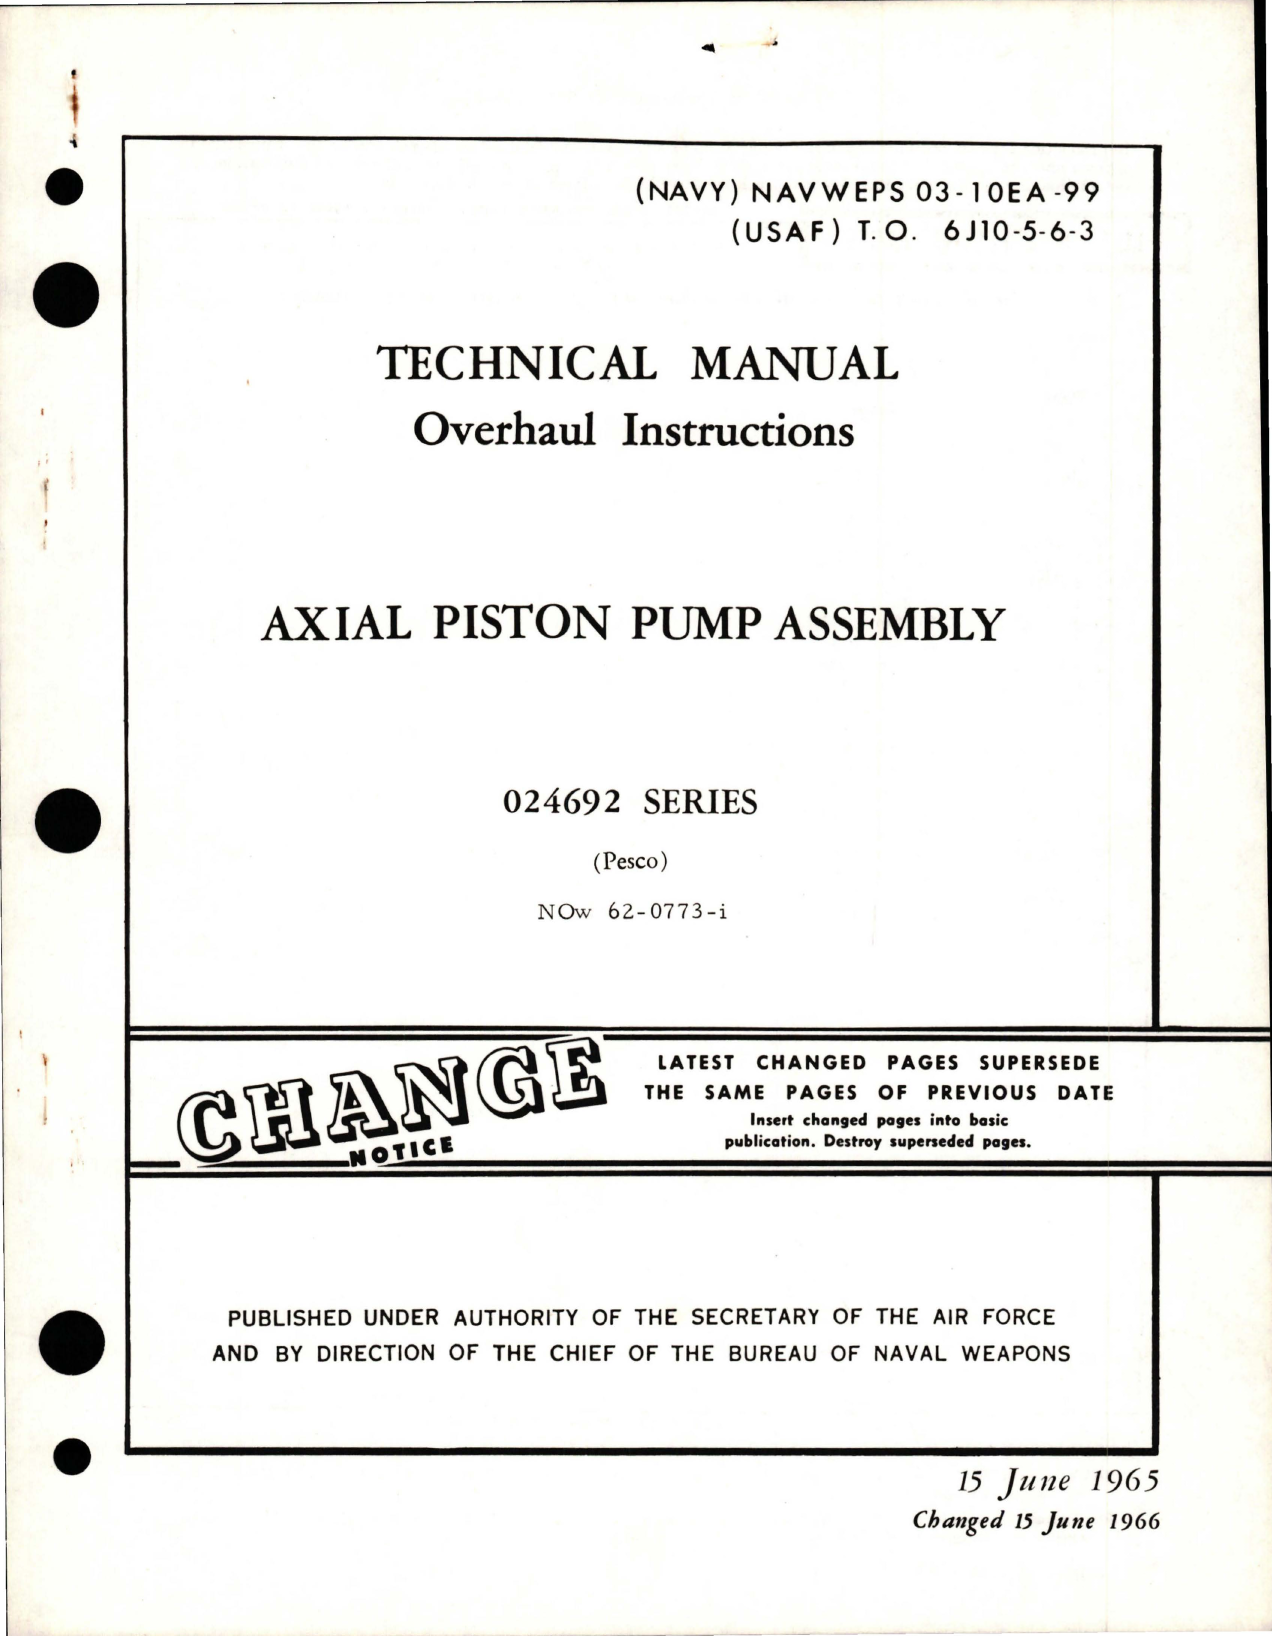 Sample page 1 from AirCorps Library document: Overhaul Instructions for Axial Piston Pump Assembly - 024693 Series